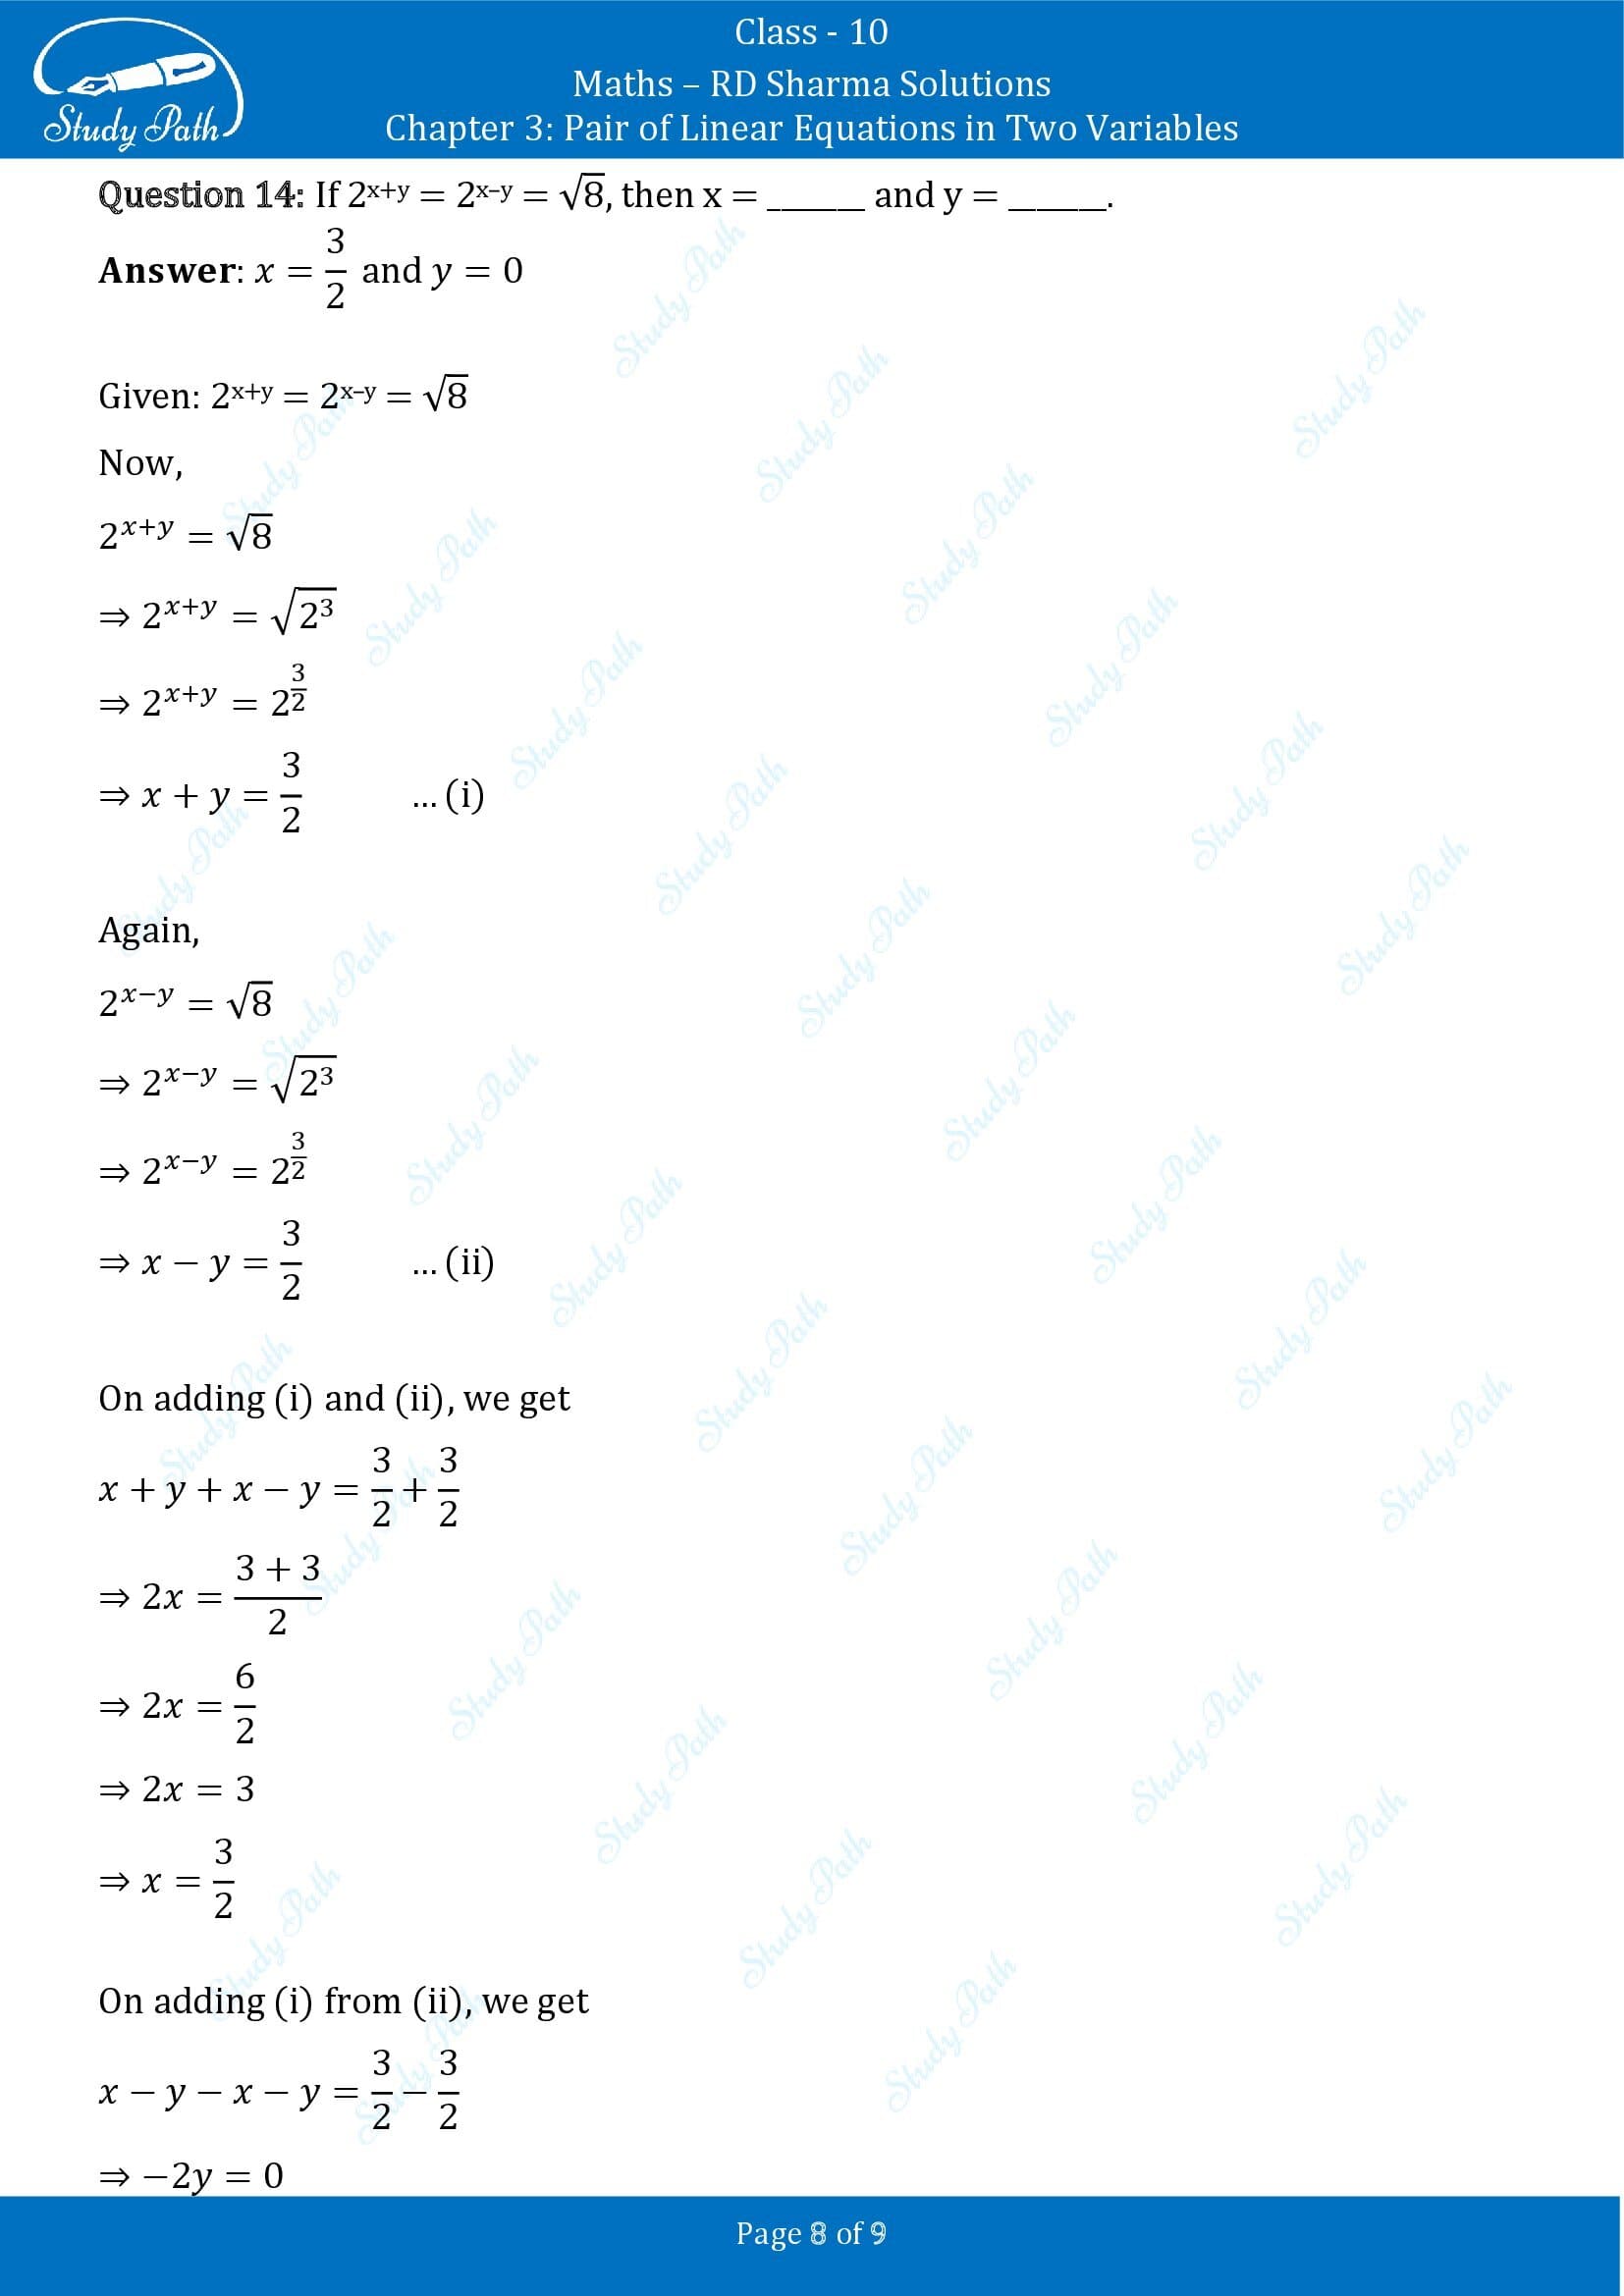 RD Sharma Solutions Class 10 Chapter 3 Pair of Linear Equations in Two Variables Exercise Fill in the Blank Type Questions FBQs 00008